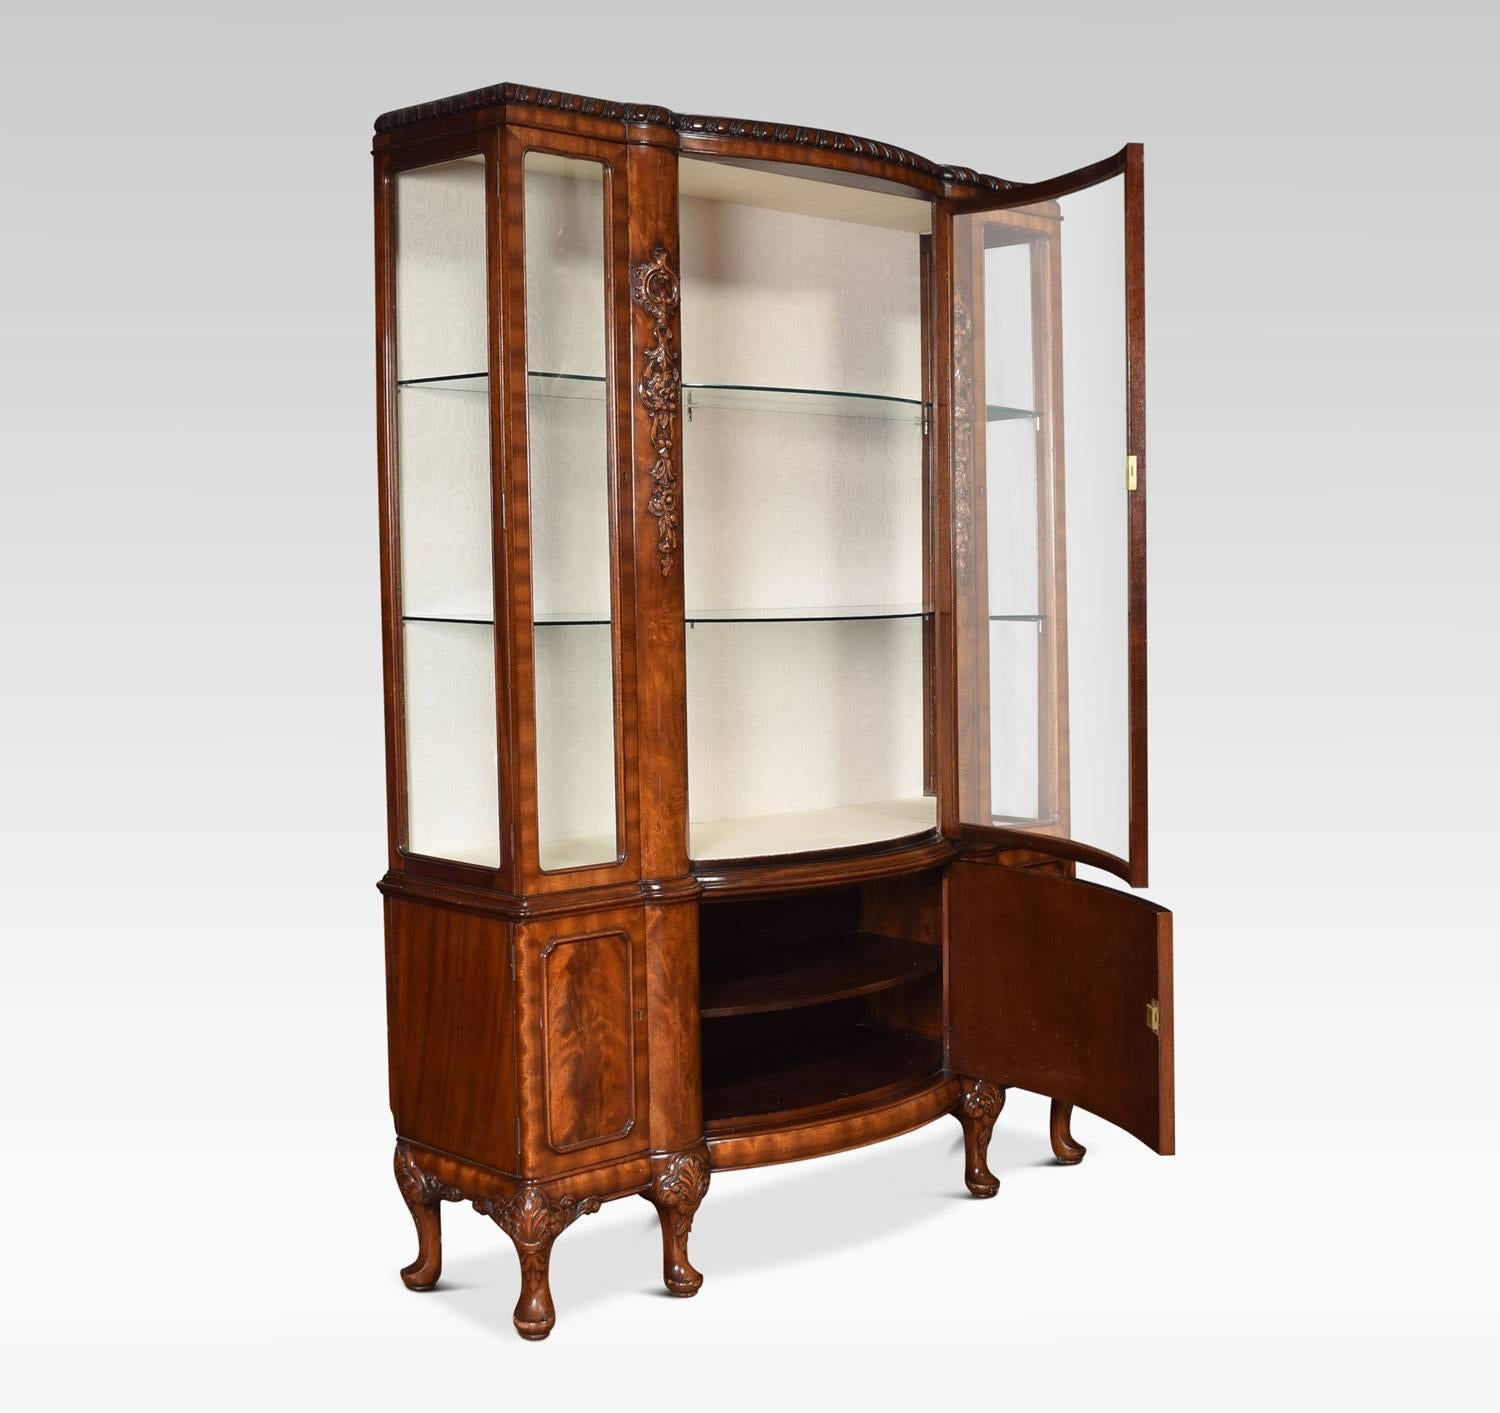 British Chippendale Revival Mahogany Bow Fronted Display Cabinet